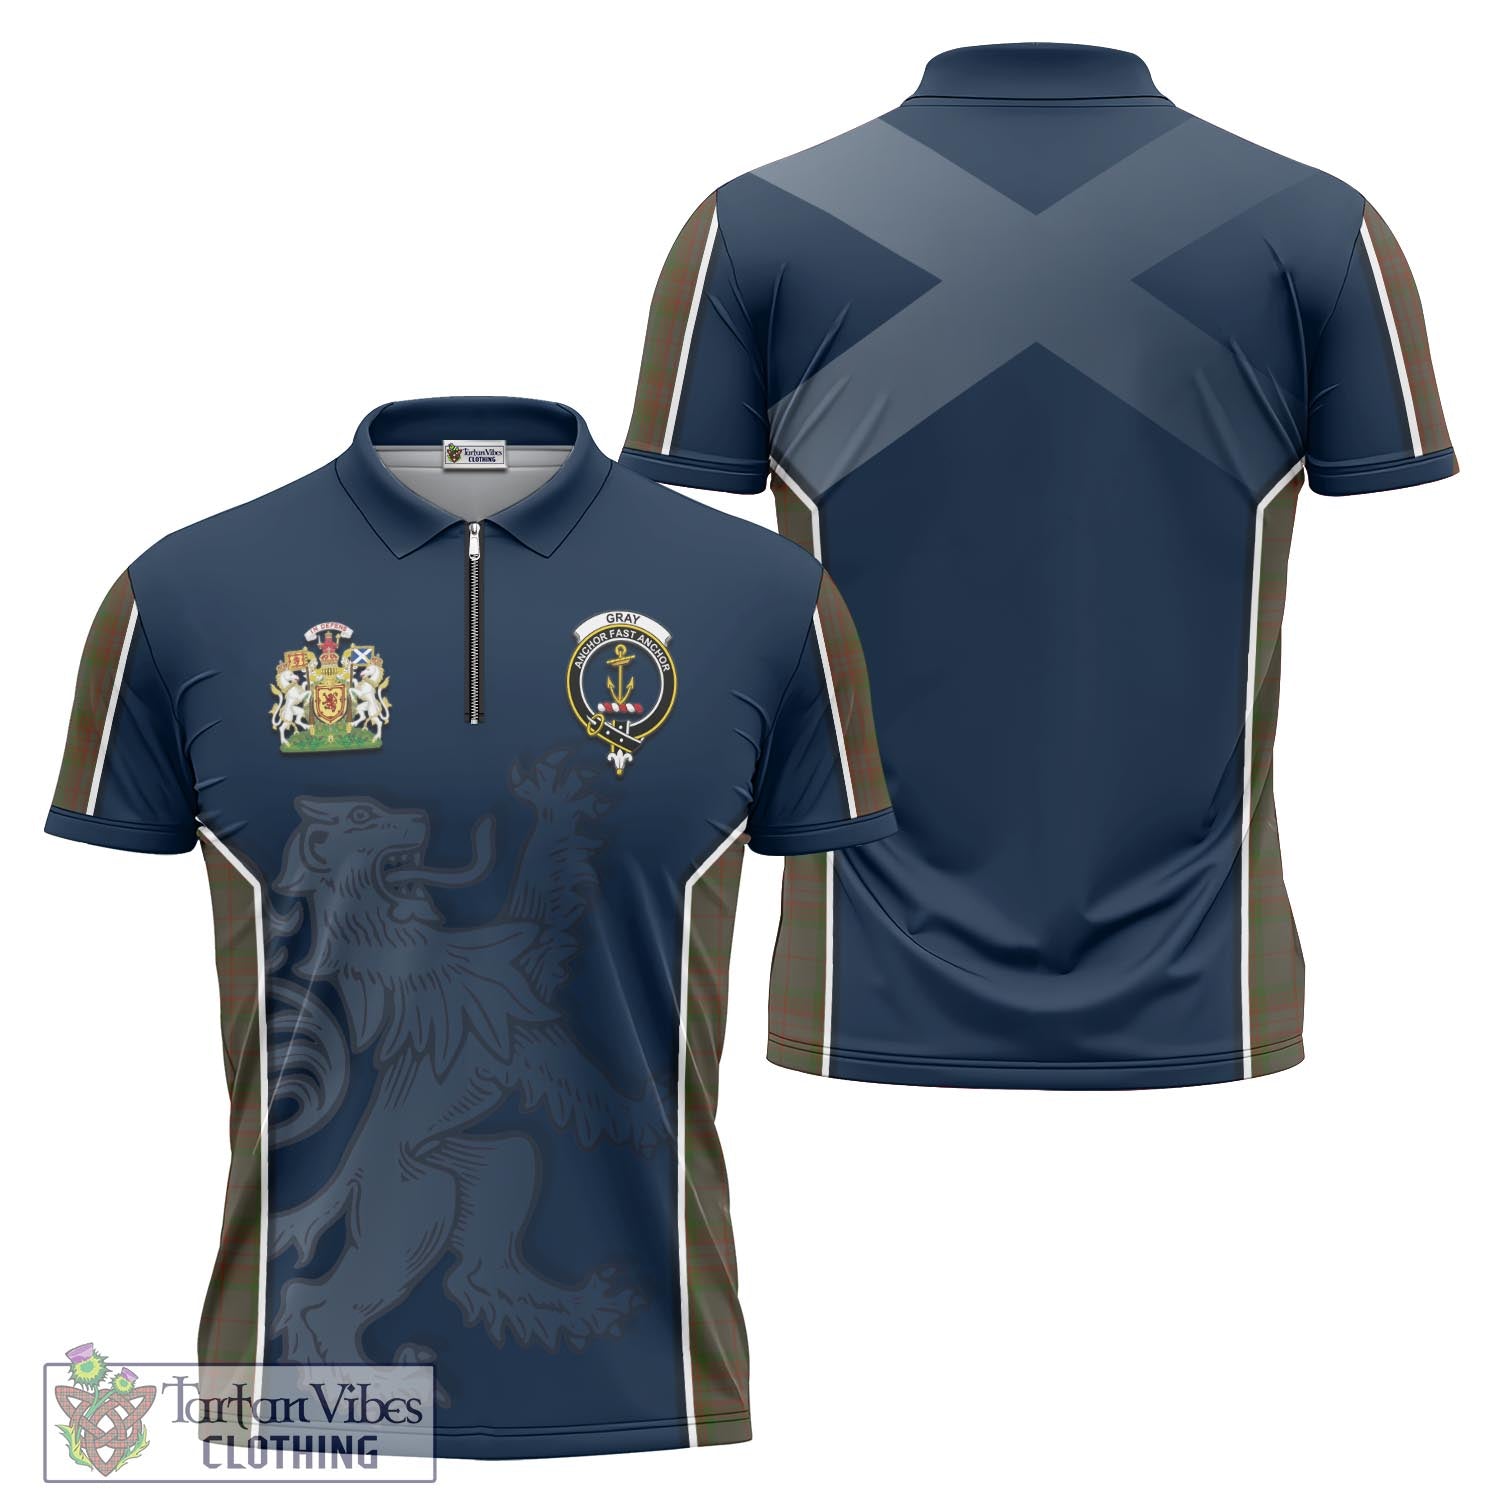 Tartan Vibes Clothing Gray Tartan Zipper Polo Shirt with Family Crest and Lion Rampant Vibes Sport Style